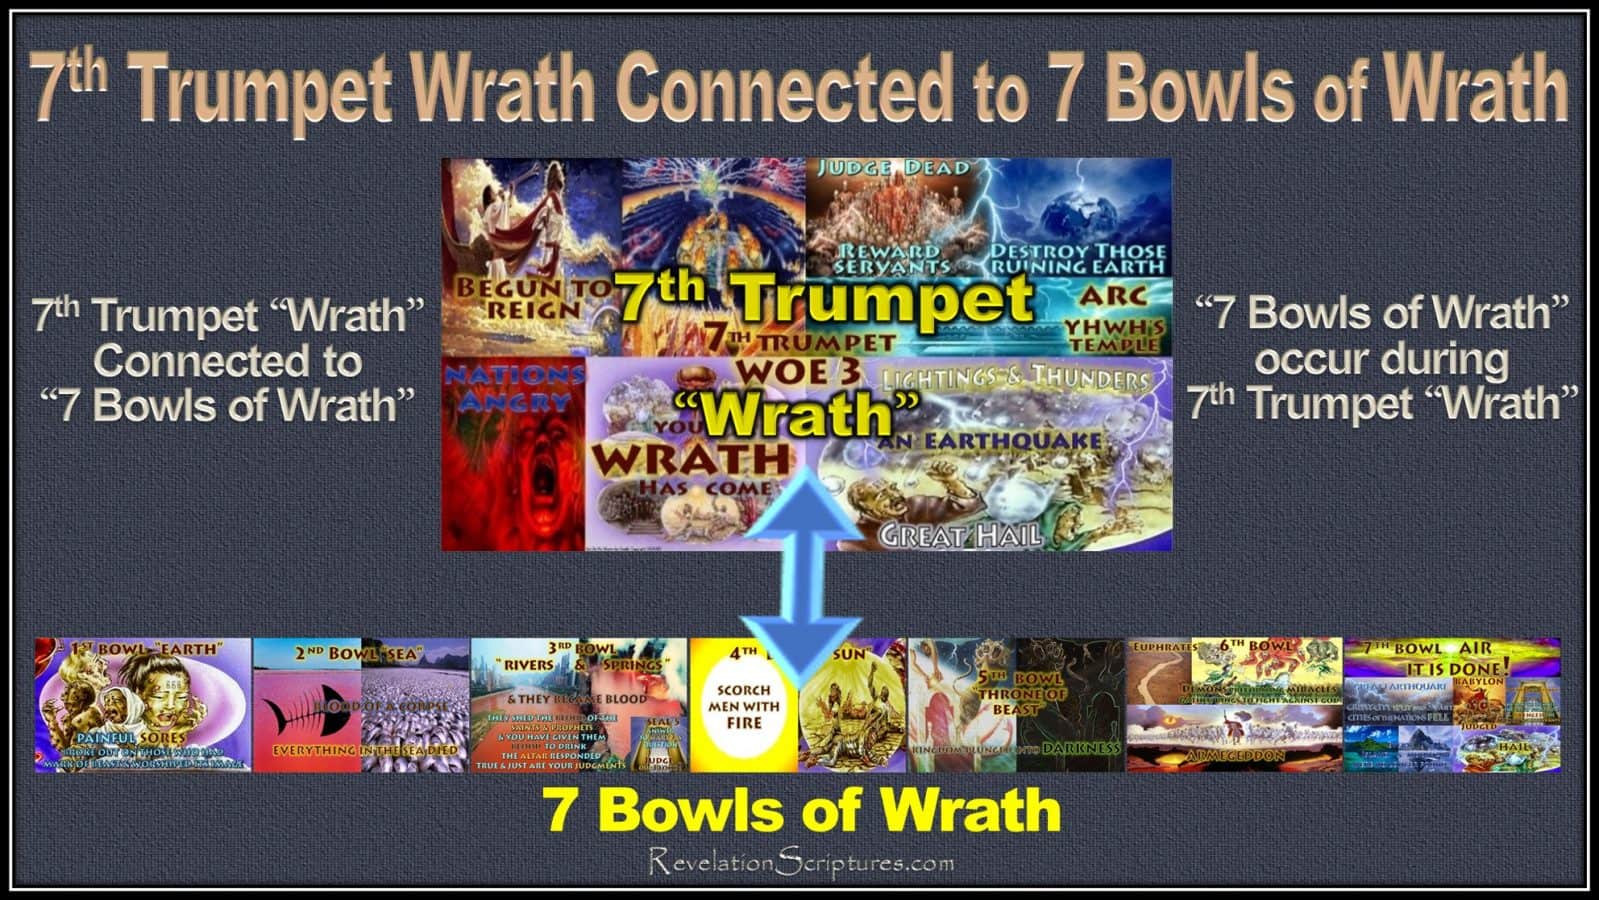 Book of Revelation,the Book of Revelation,7 Seals,7 Trumpets,7 Bowls of Wrath, how to connect,connecting 7 Seals to 7 Trumpets,Connecting 7 Seals to 7 Bowls of Wrath,Connecting 7 Seals to 7 Trumpets to 7 Bowls of Wrath,How to connect the timelines of Revelation,connecting the timelines of Revelation,connecting the events of Revelation,connect 7 Trumpets to 7 Bowls,connect trumpets and Bowls,connect Trumpets and Vials,how to connect the trumpets to bowls,7th Trumpet wrath,wrath,wrath in 7th Trumpet,Seventh Trumpet,join,blend,merge,connect,big picture,Rev 11,Revelation 11, 7 Seals,7Bowls,7 Bowls of Wrath,7 Vials,7 Vials of wrath,How to connect 7 Seals to 7 Bowls, Connect 7 Seals to 7 Bowls,connect 7 Seals to 7 Vials of Wrath,How to Join 7 Seals to 7 Bowls,Join Seals and Bowls,join Seals and Viles,6th Seal,Day of Wrath,great day of their wrath,merge 7 Seals to 7 Bowls,connect Seals to Bowls,Merge 7 Seals to 7 Vials,Book of Revelation,Wrath to Wrath,connect wrath to wrath,align Seals with Bowls,Align Seals to Vials,line up seals to Bowls,line up seals to vials,Line up 7 Seals to 7 Bowls,Rev 15,Rev 16,Revelation 15,Revelation 16,Rev 6,Revelation 6